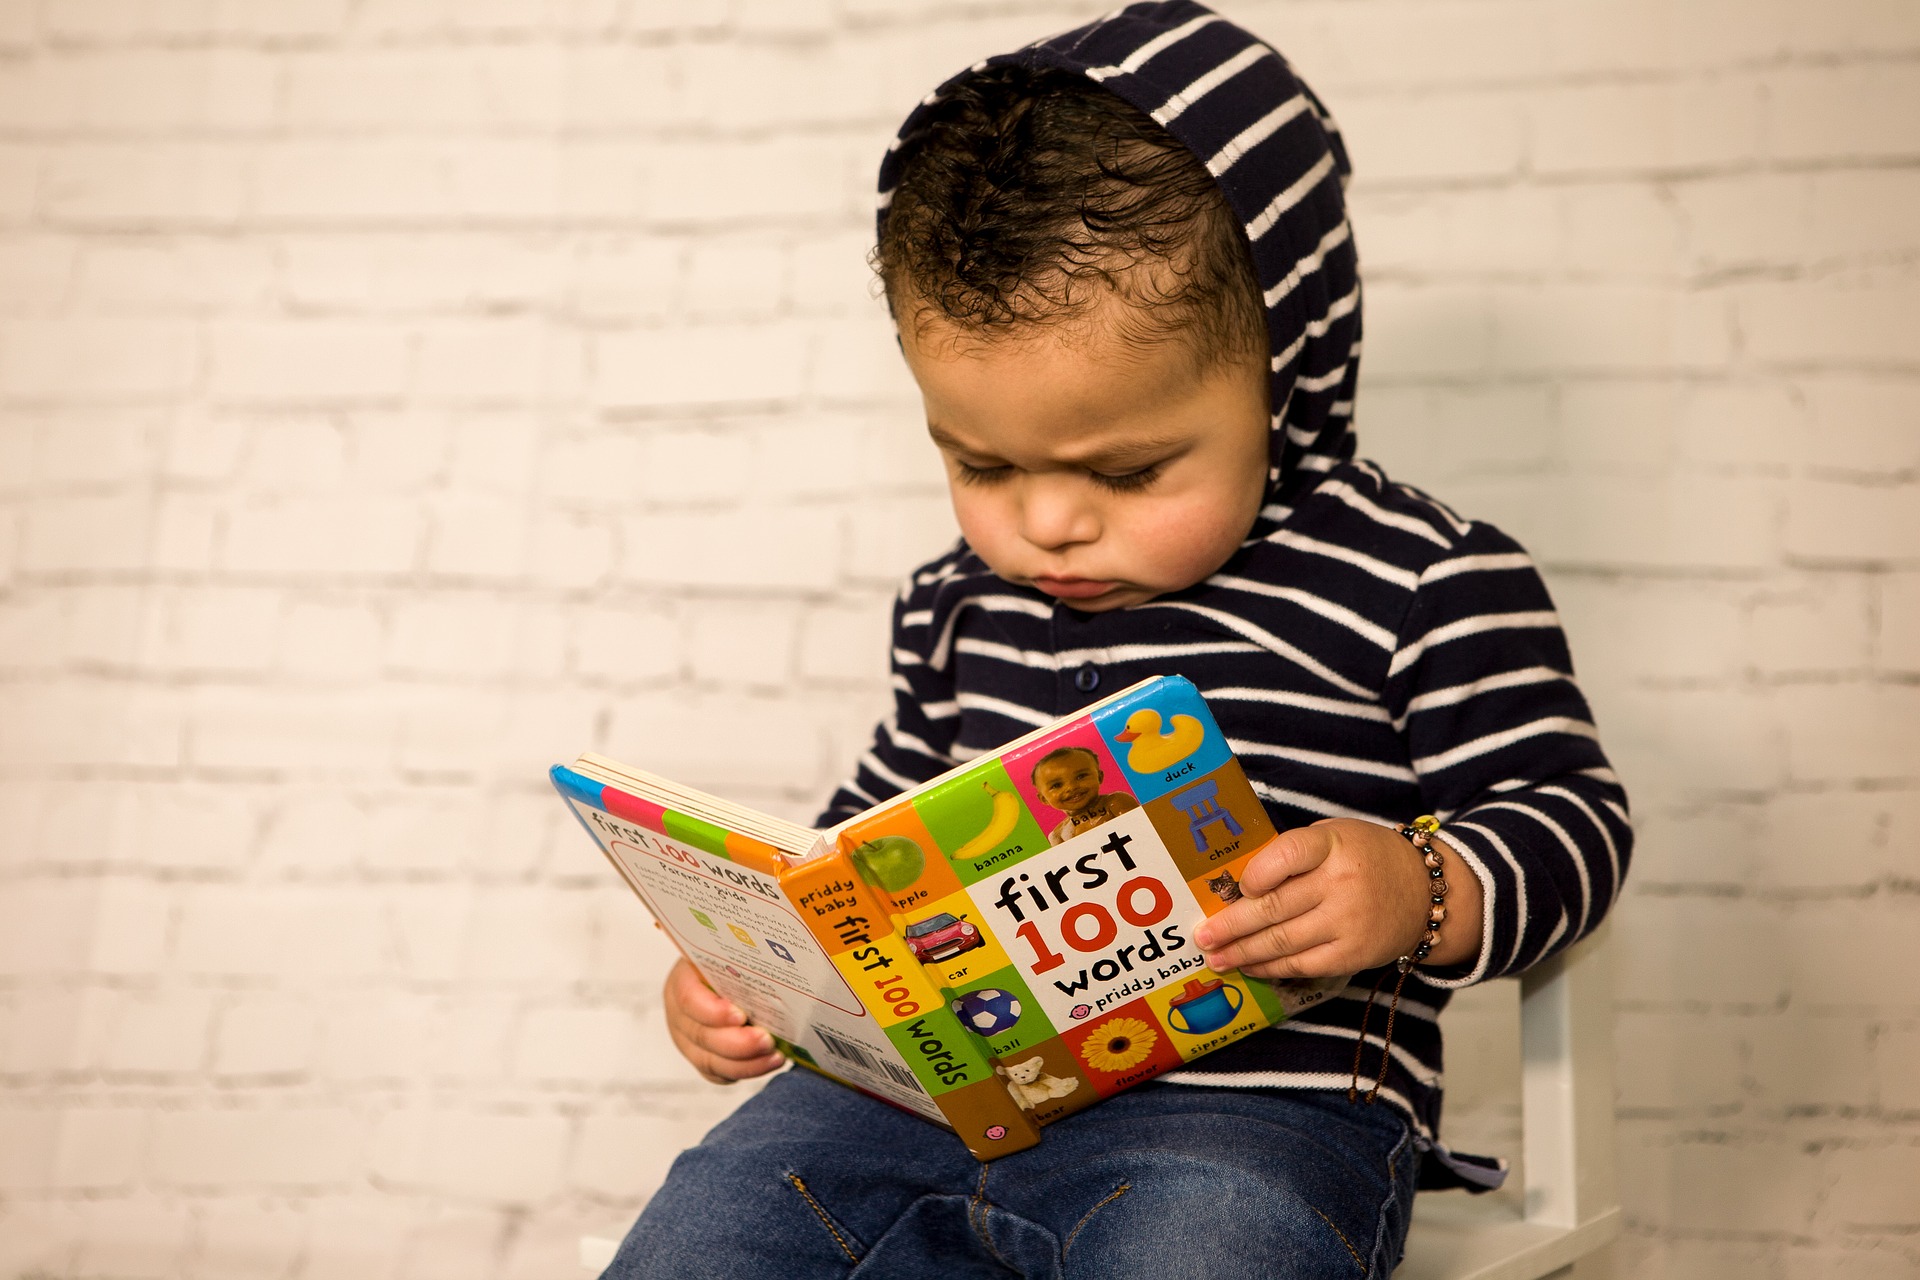 A baby with brown skin and curly black hair sits reading a book with the title, "First 100 words." The baby wears a black and white horizontally-striped hoodie and jeans and has furrowed their brow in concentration.